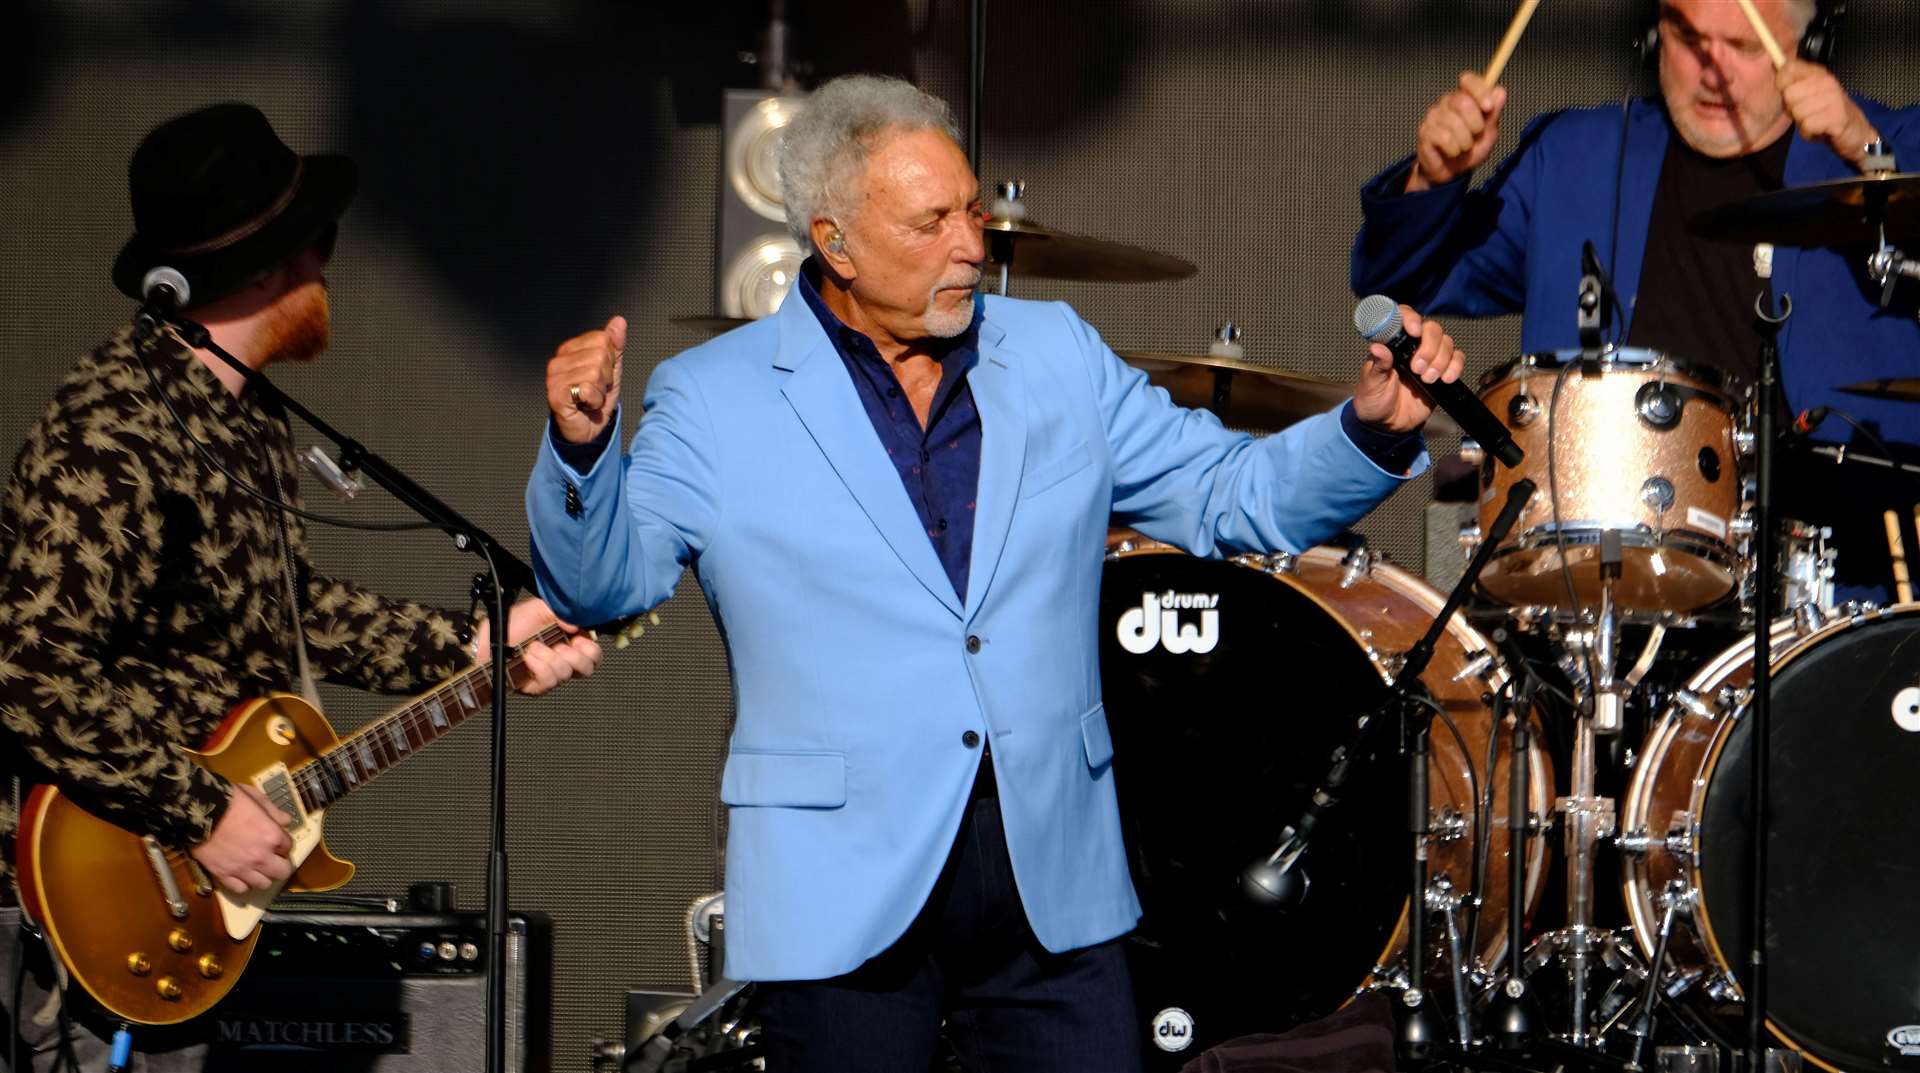 Tom Jones will play for two nights in Margate – and the first has already sold out